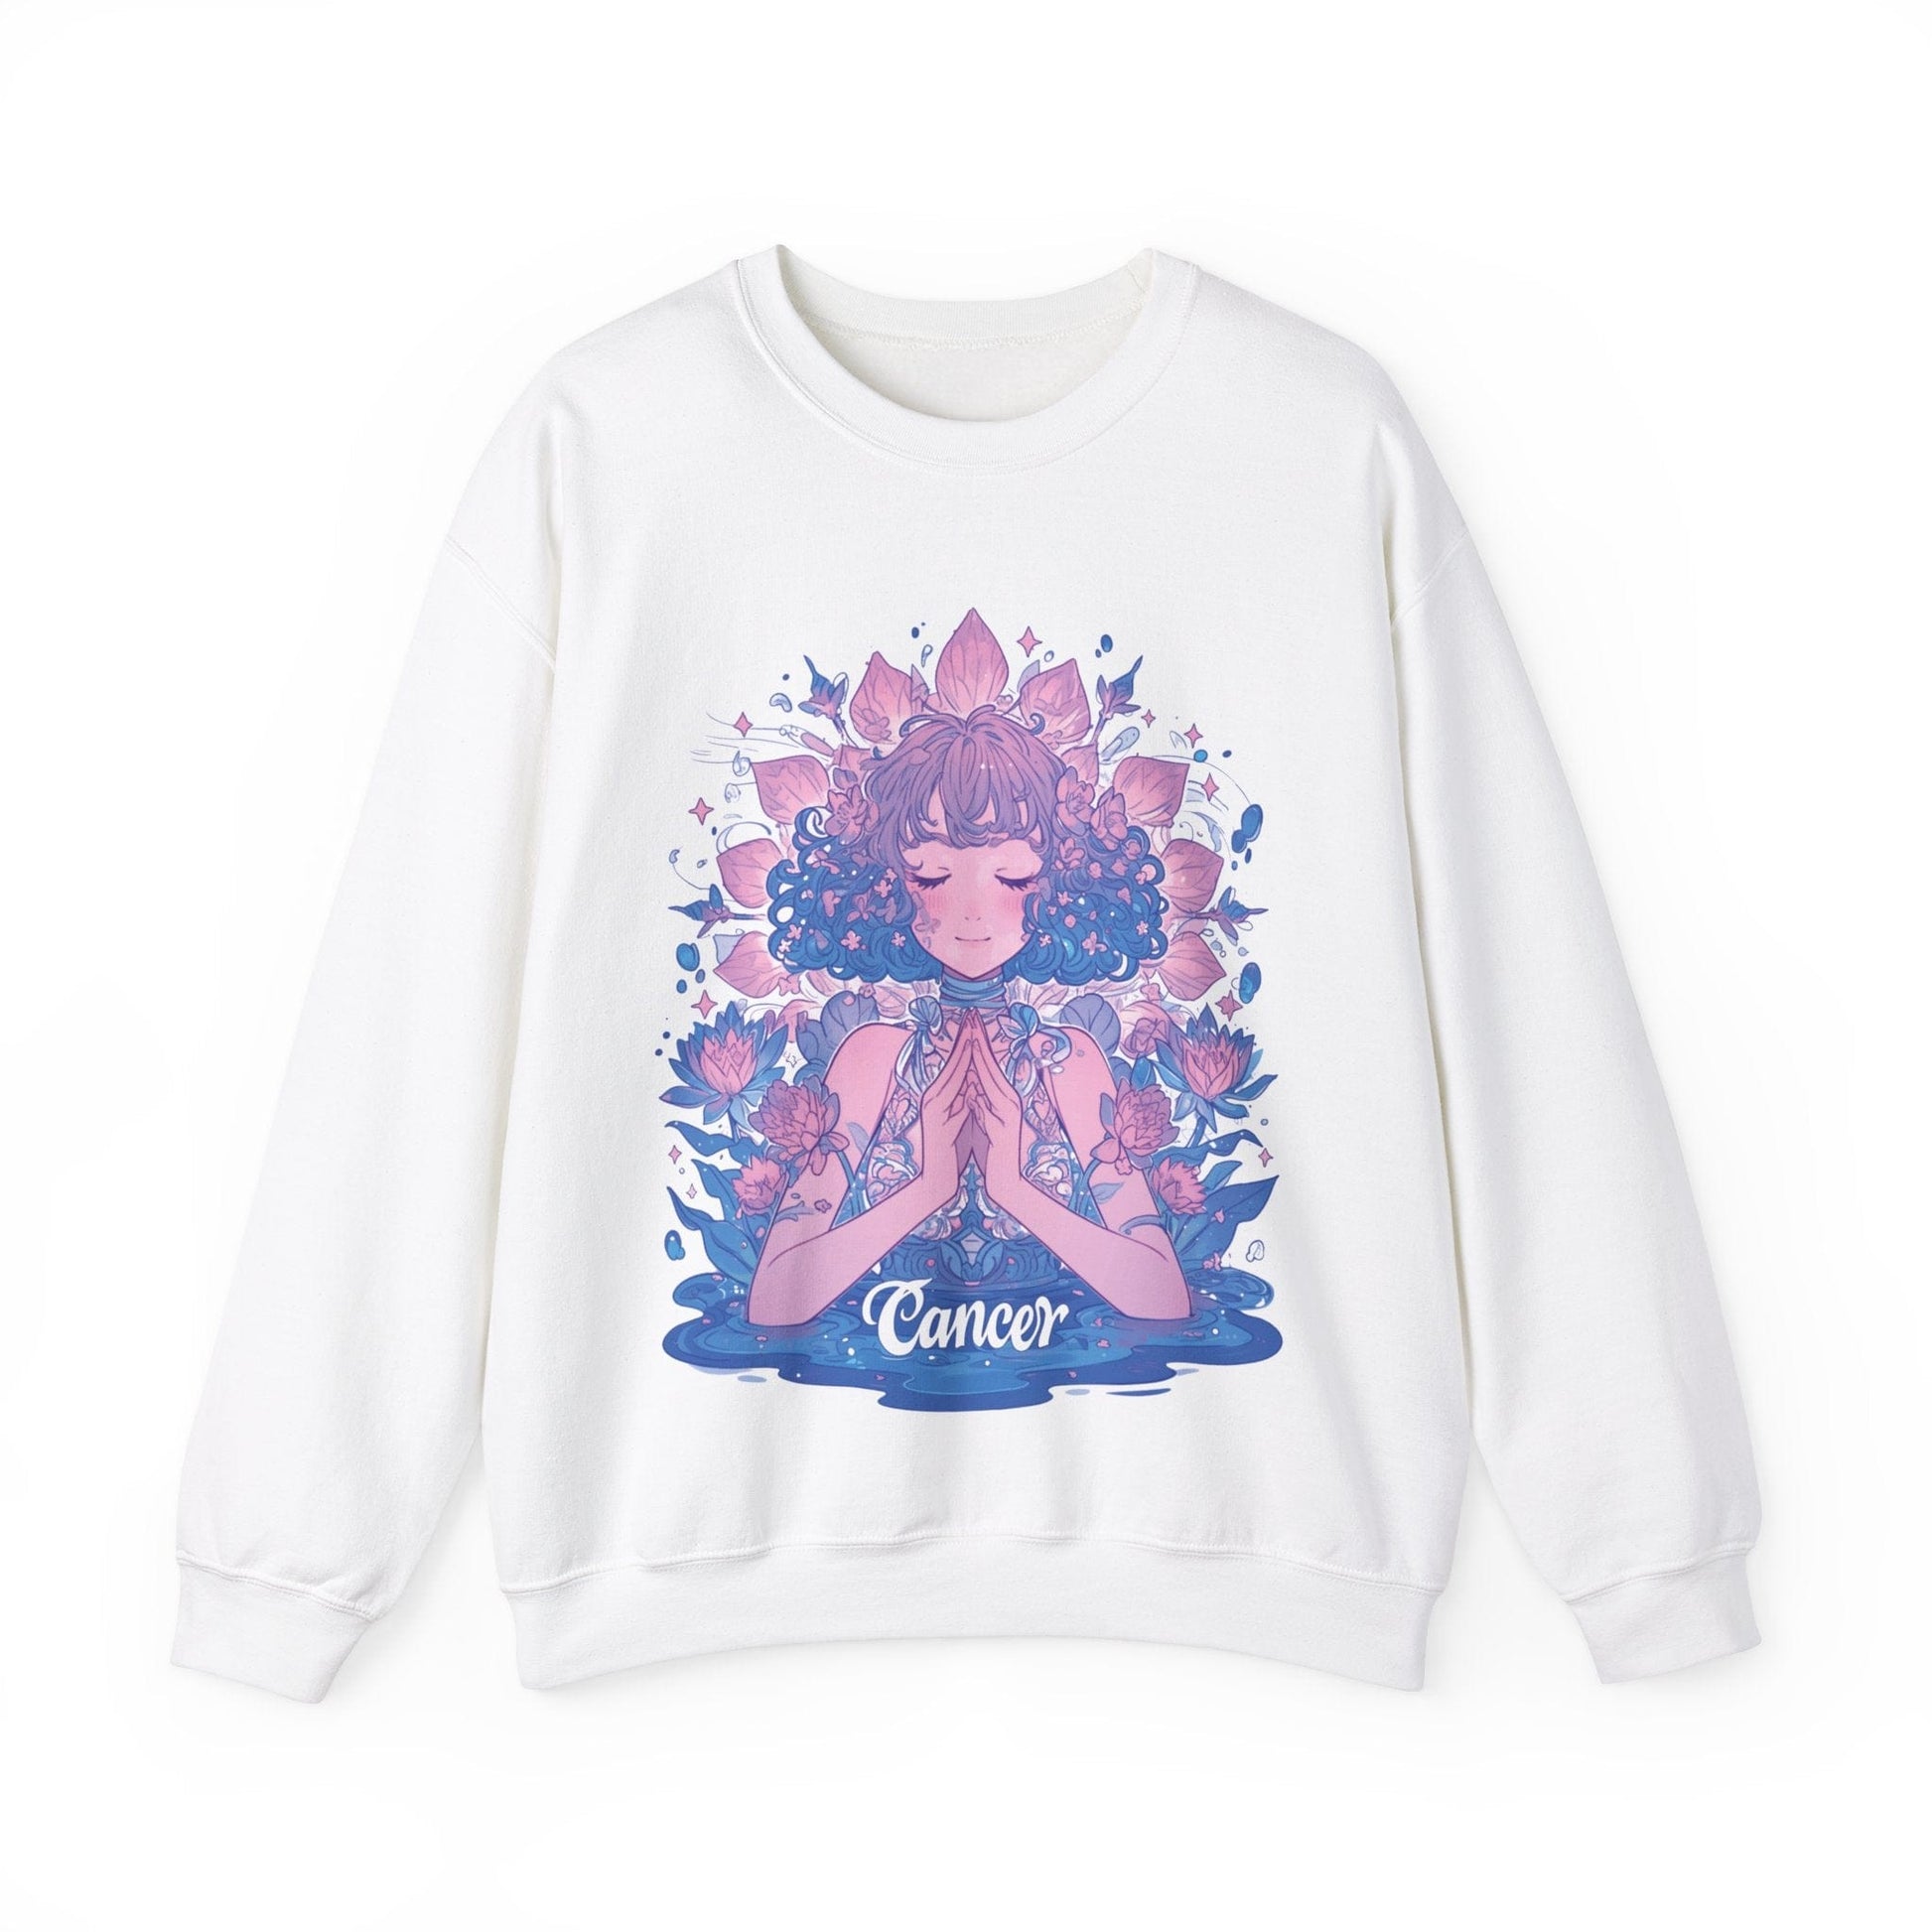 Sweatshirt S / White Lunar Bloom Cancer Sweater: Embrace Tranquility